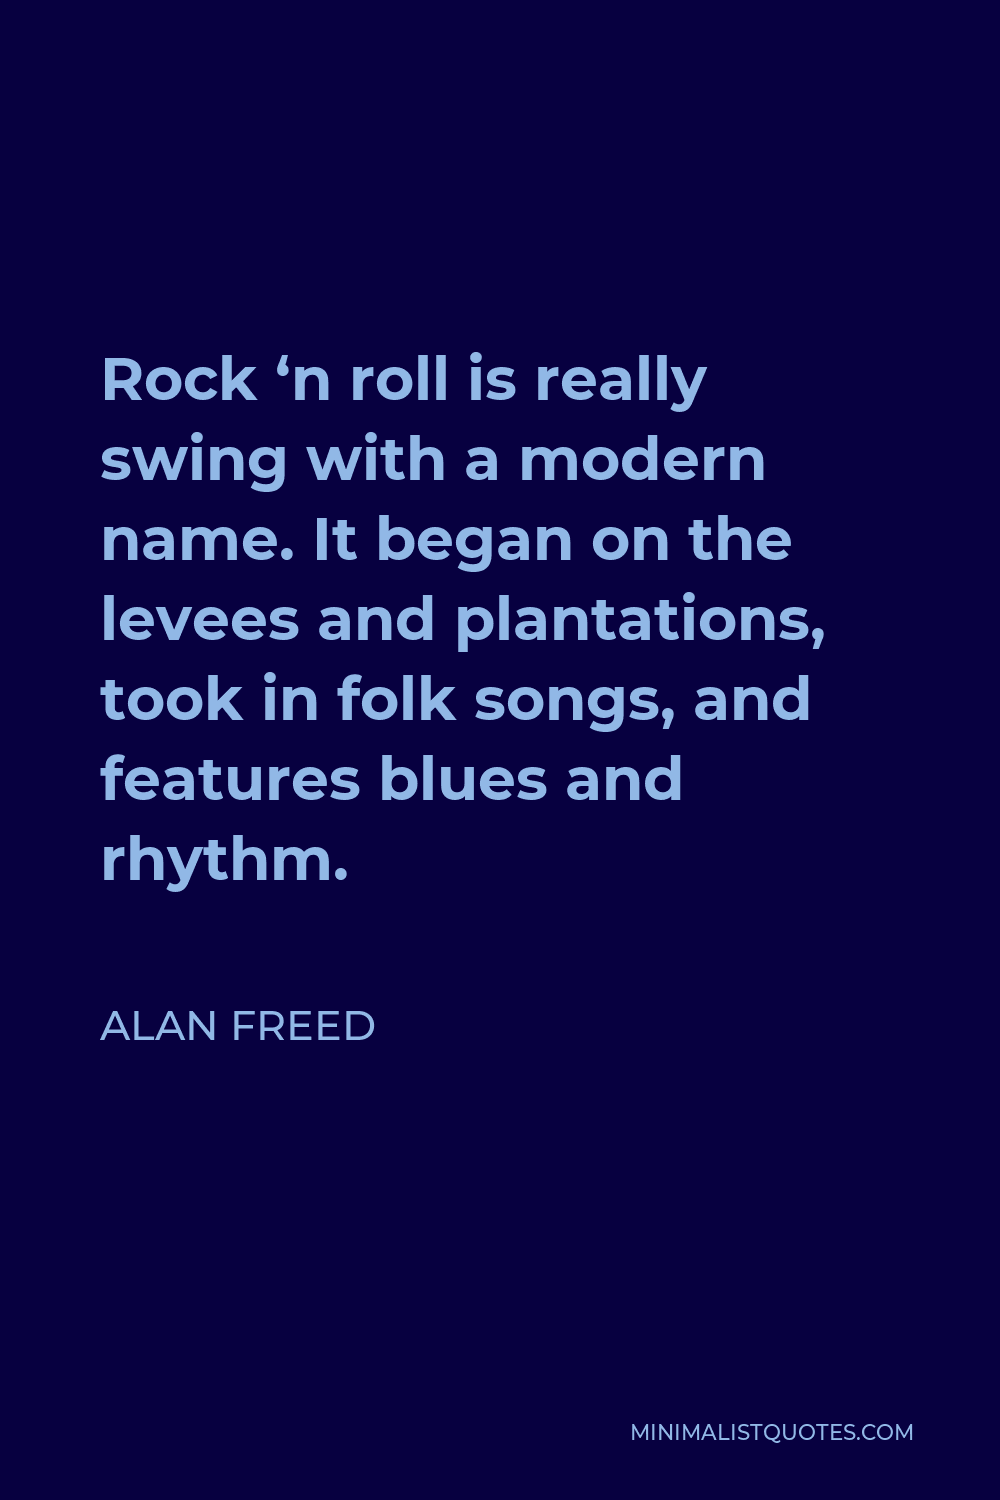 Alan Freed Quote - Rock ‘n roll is really swing with a modern name. It began on the levees and plantations, took in folk songs, and features blues and rhythm.